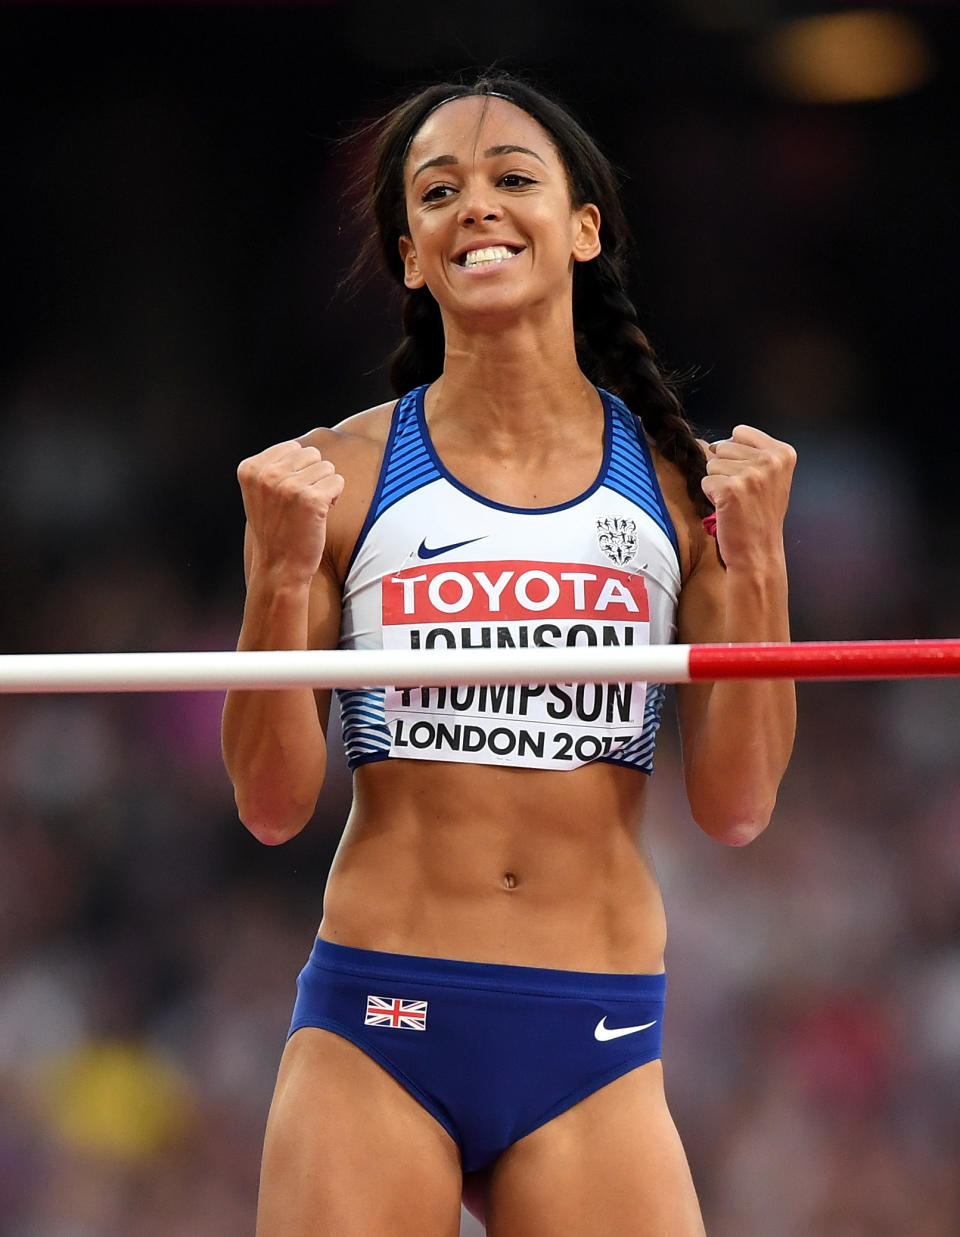 Johnson-Thompson was delighted with her fifth place in the high jump